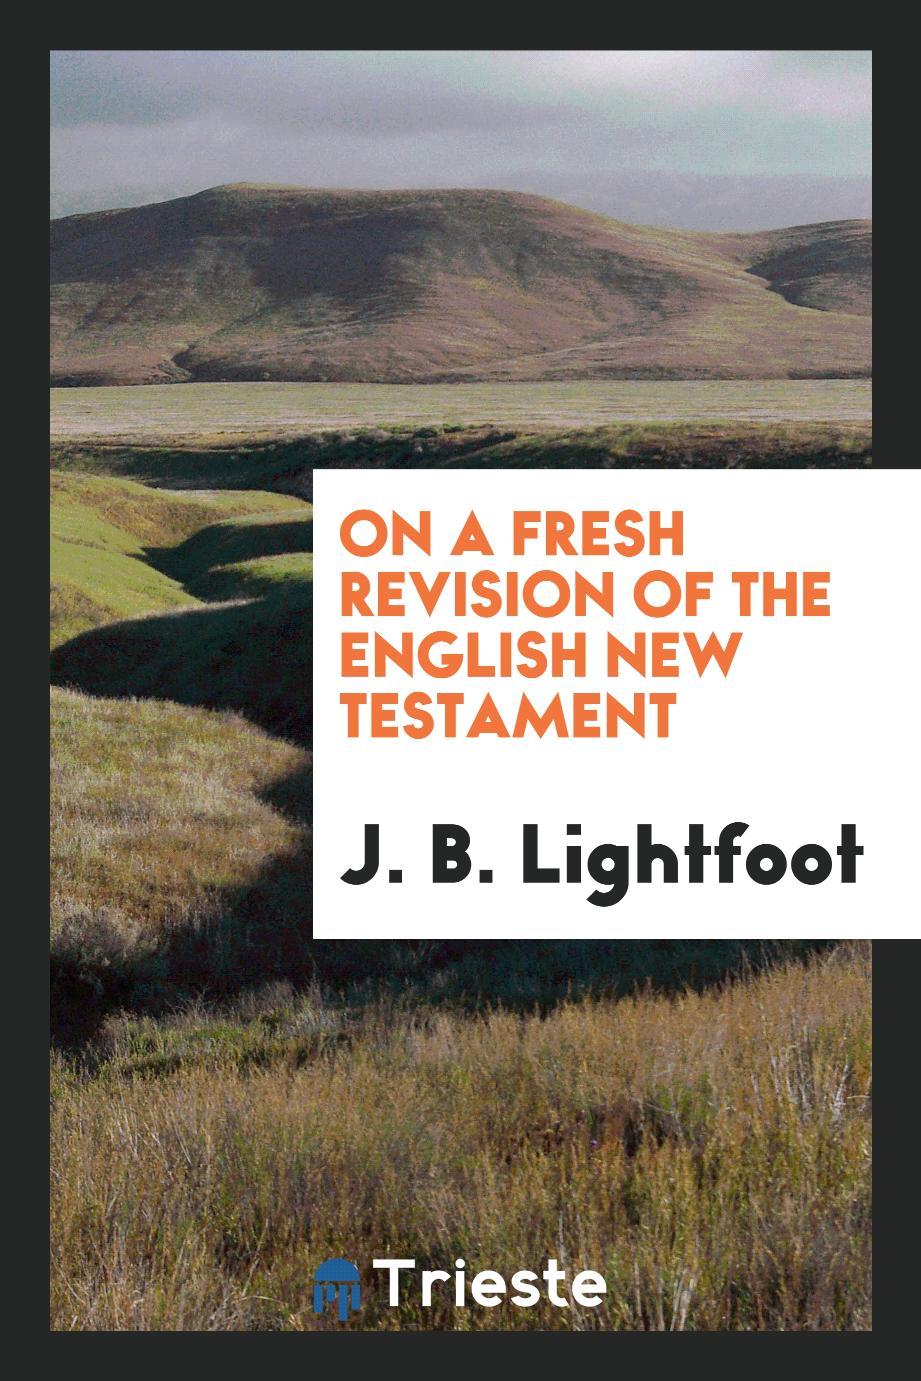 On a fresh revision of the English New Testament